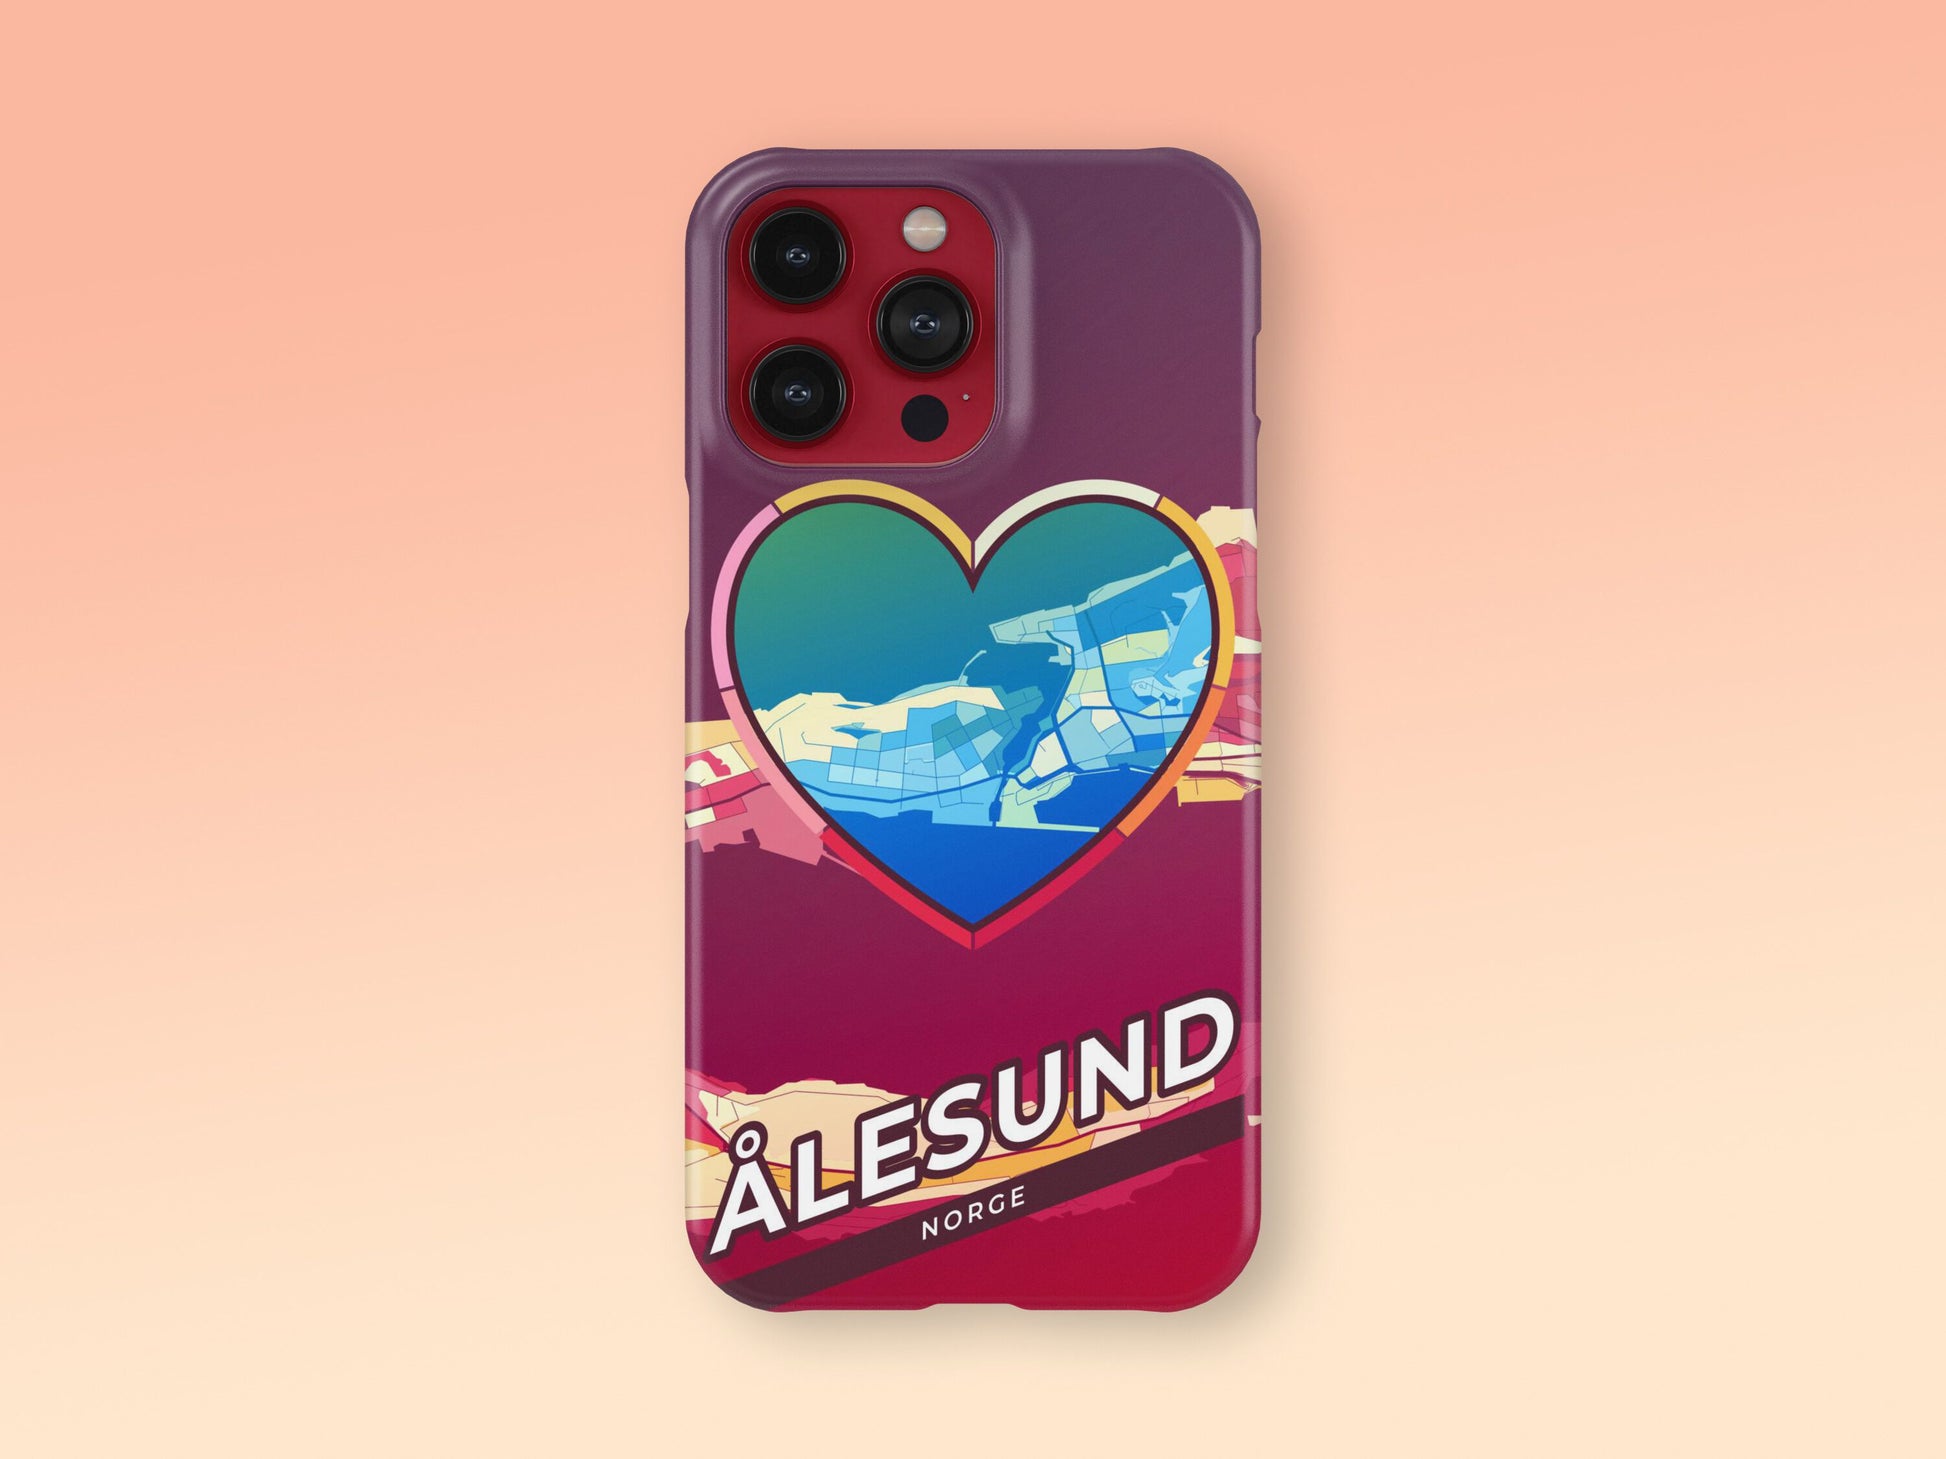 Ålesund Norway slim phone case with colorful icon. Birthday, wedding or housewarming gift. Couple match cases. 2